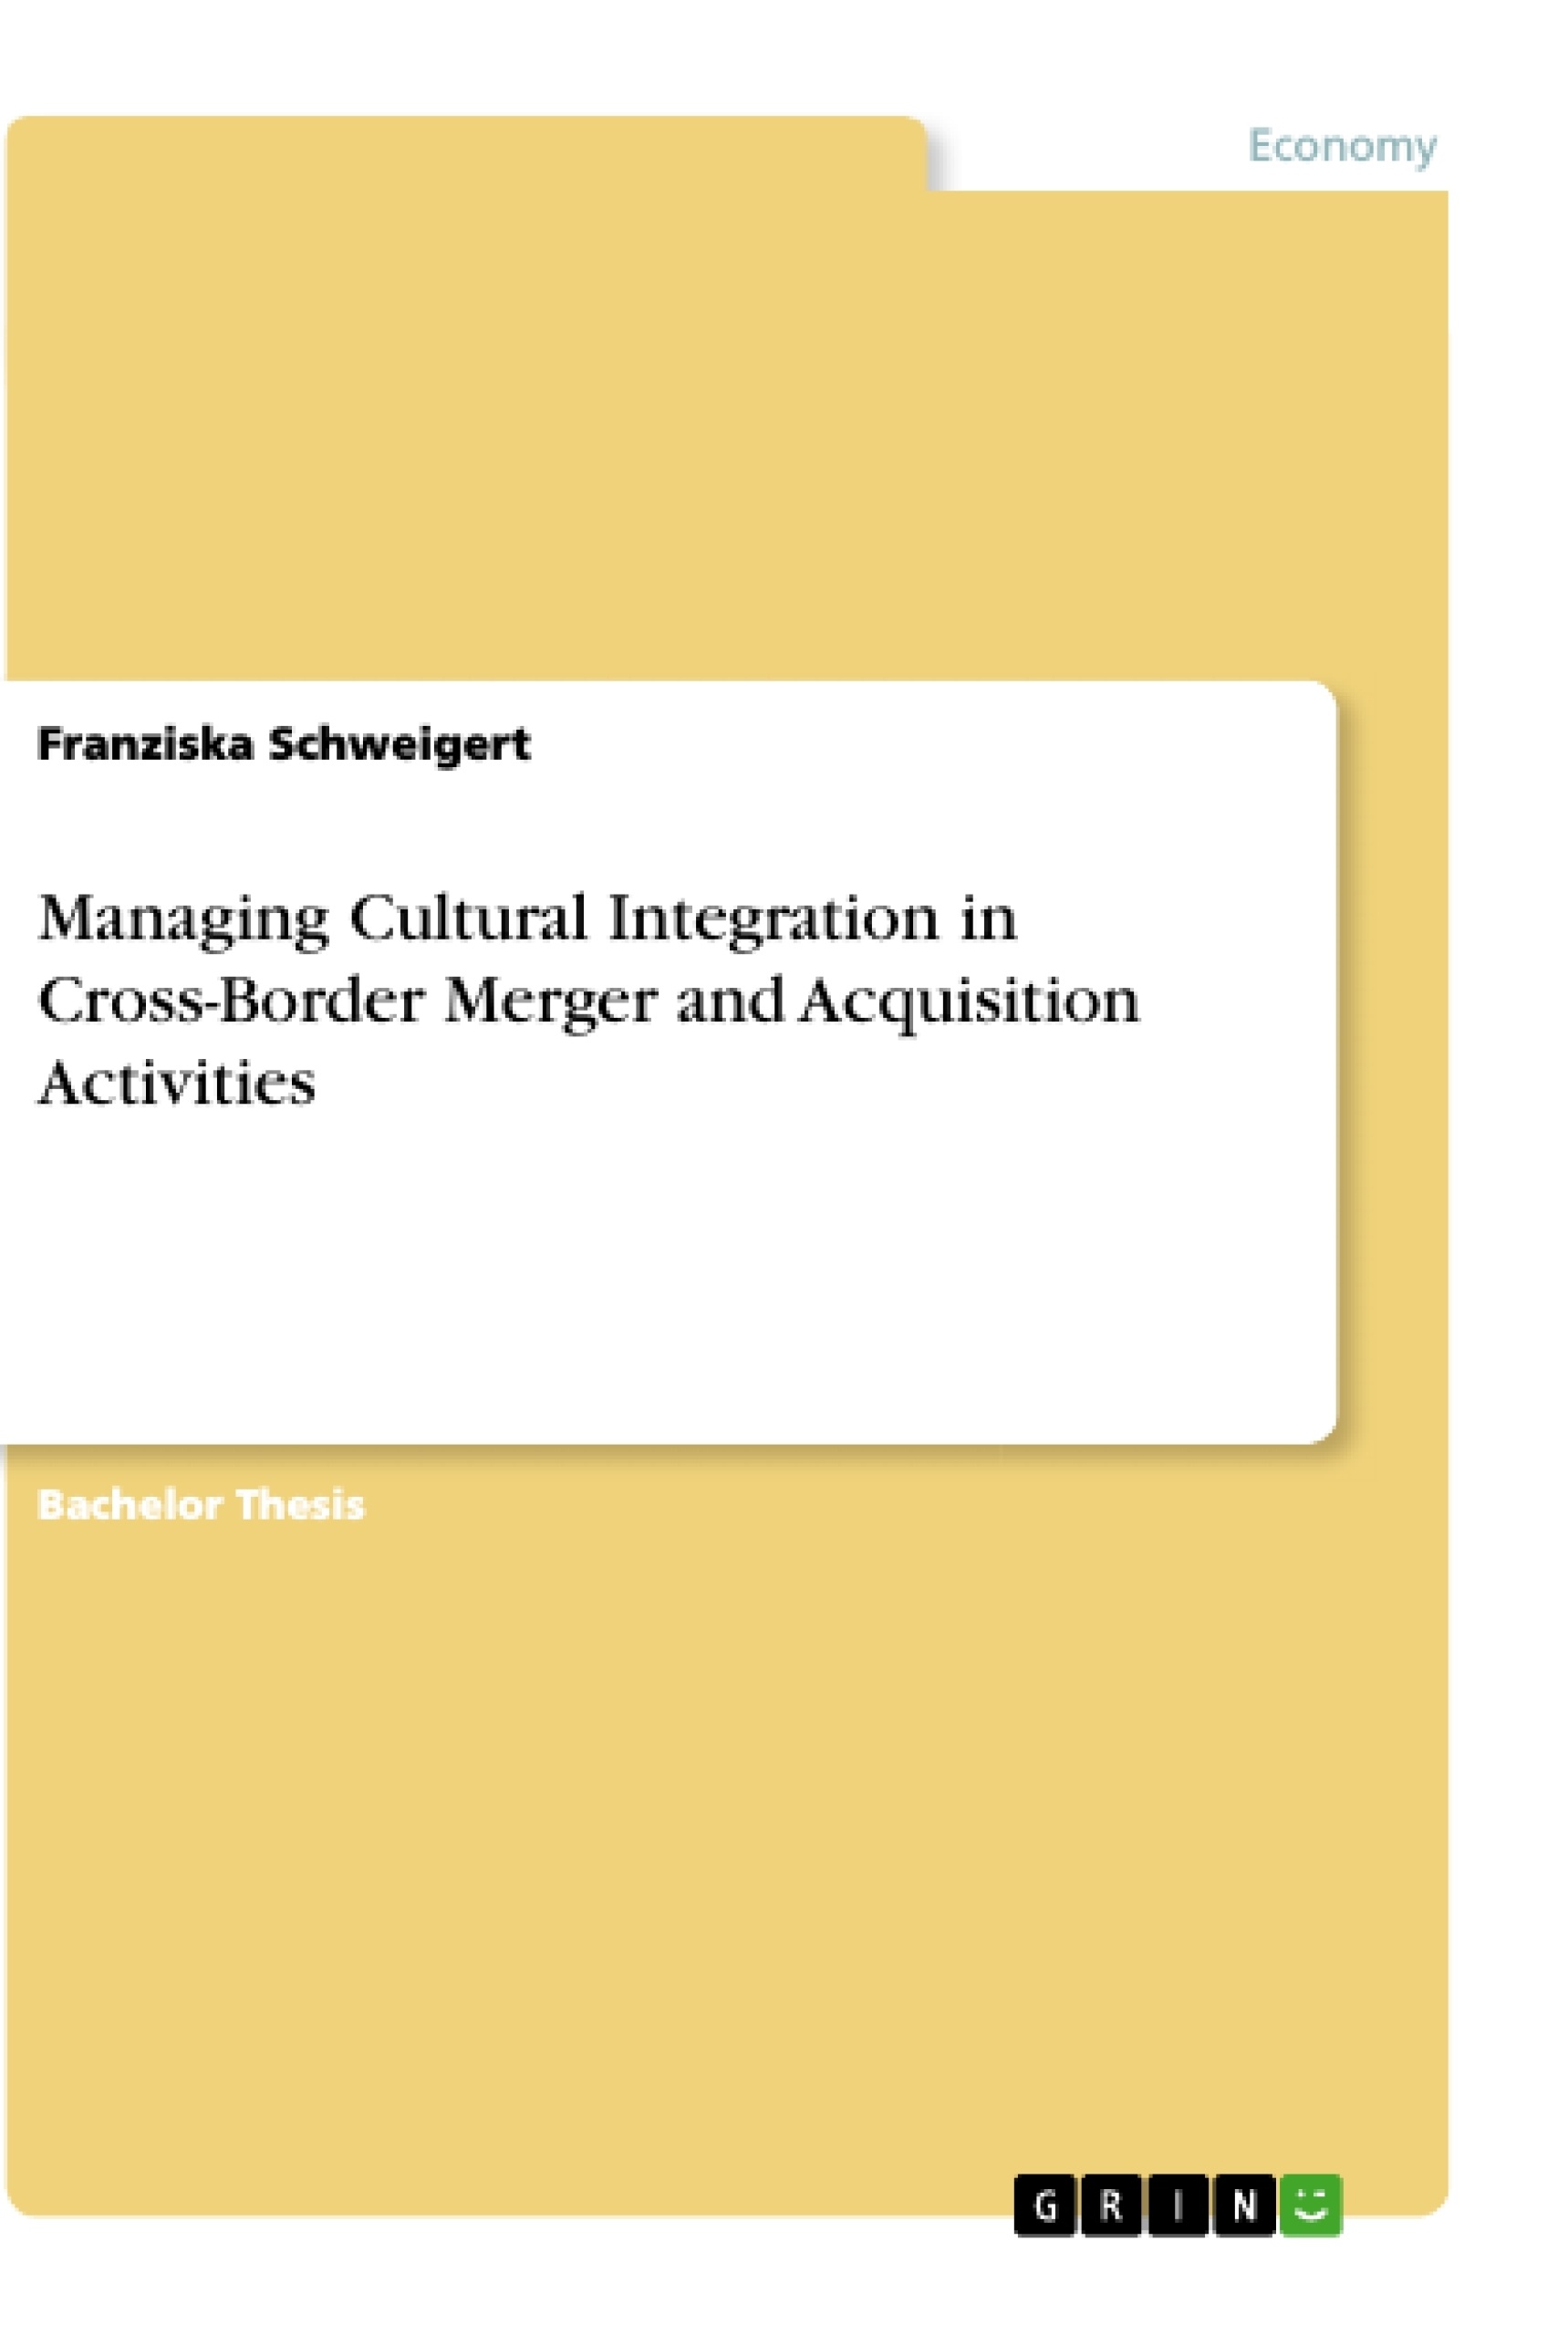 Title: Managing Cultural Integration in Cross-Border Merger and Acquisition Activities